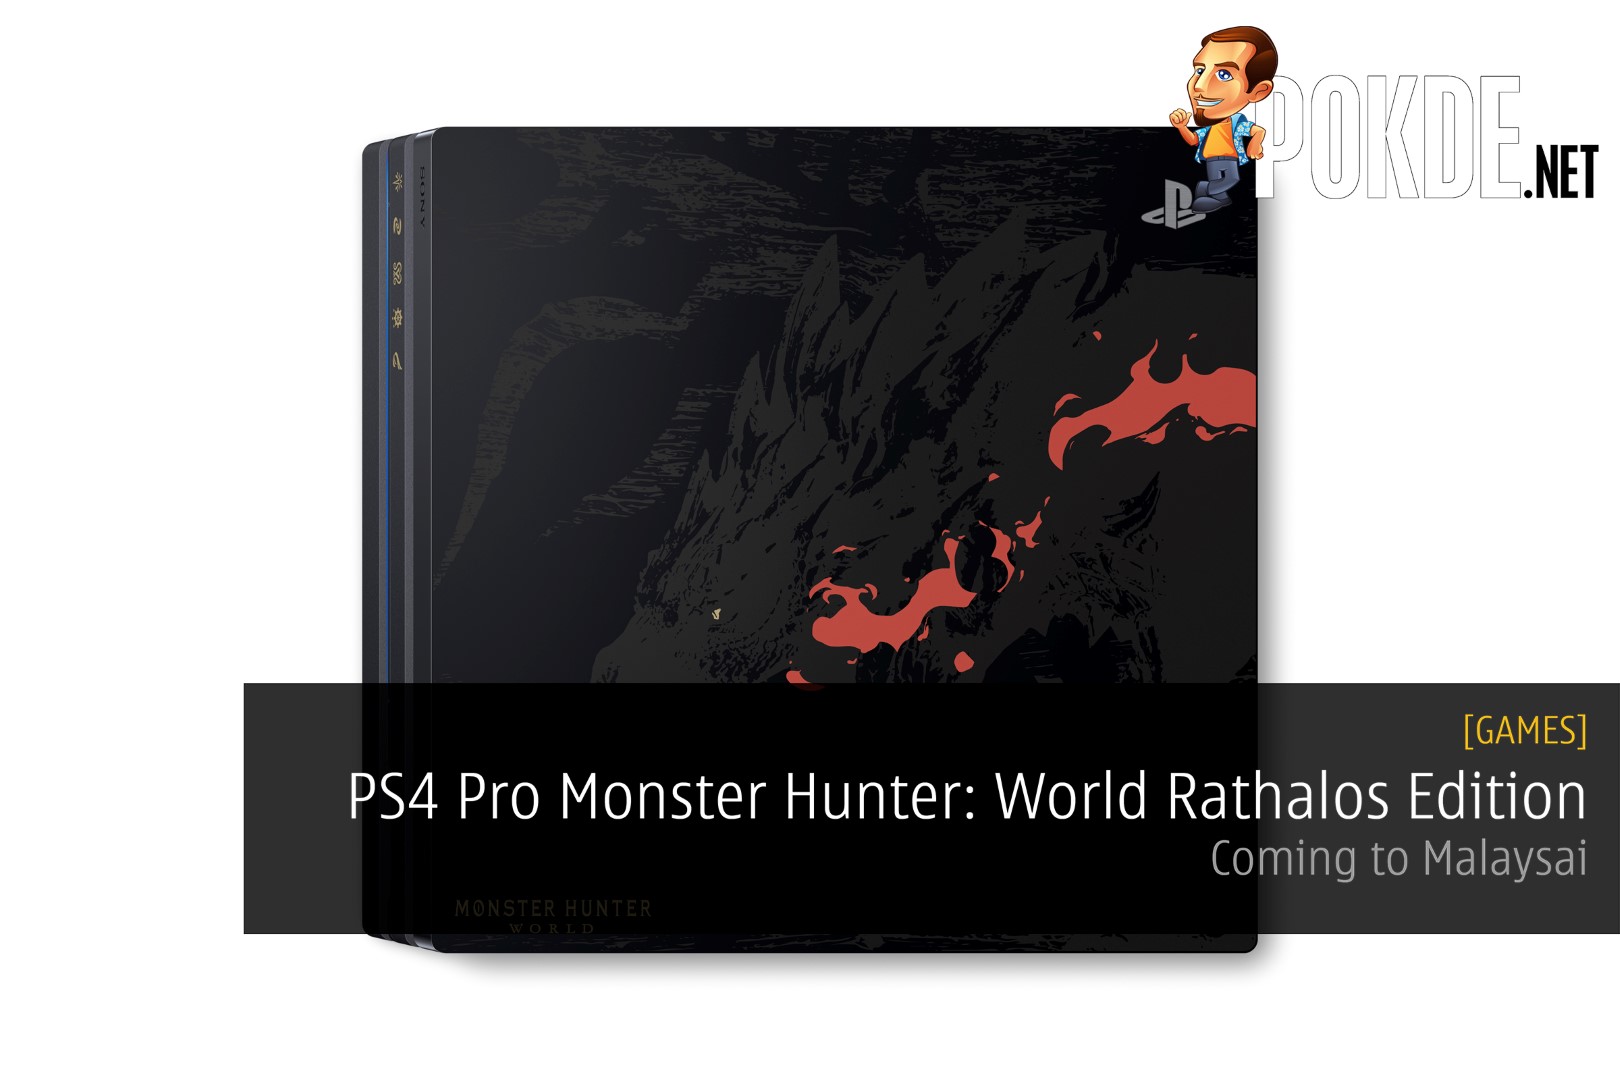 PS4 Pro Monster Hunter: World Rathalos Edition Is Coming To Malaysia! 26